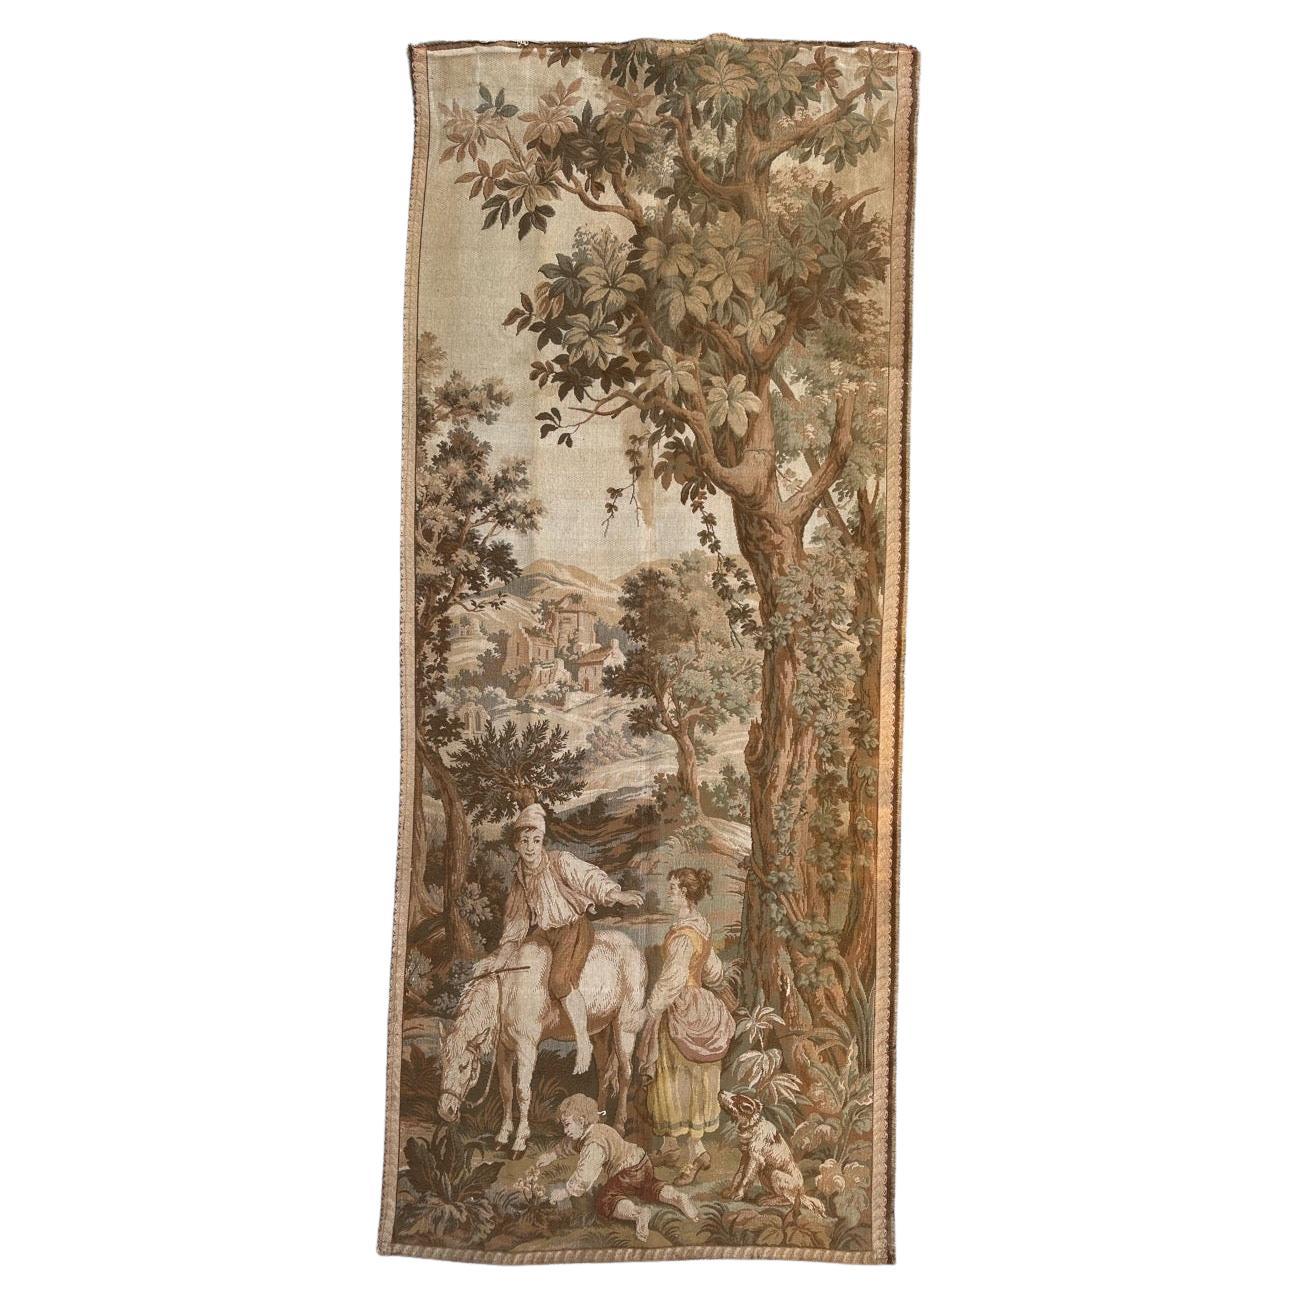 Bobyrug’s pretty antique French Aubusson style Jacquard tapestry